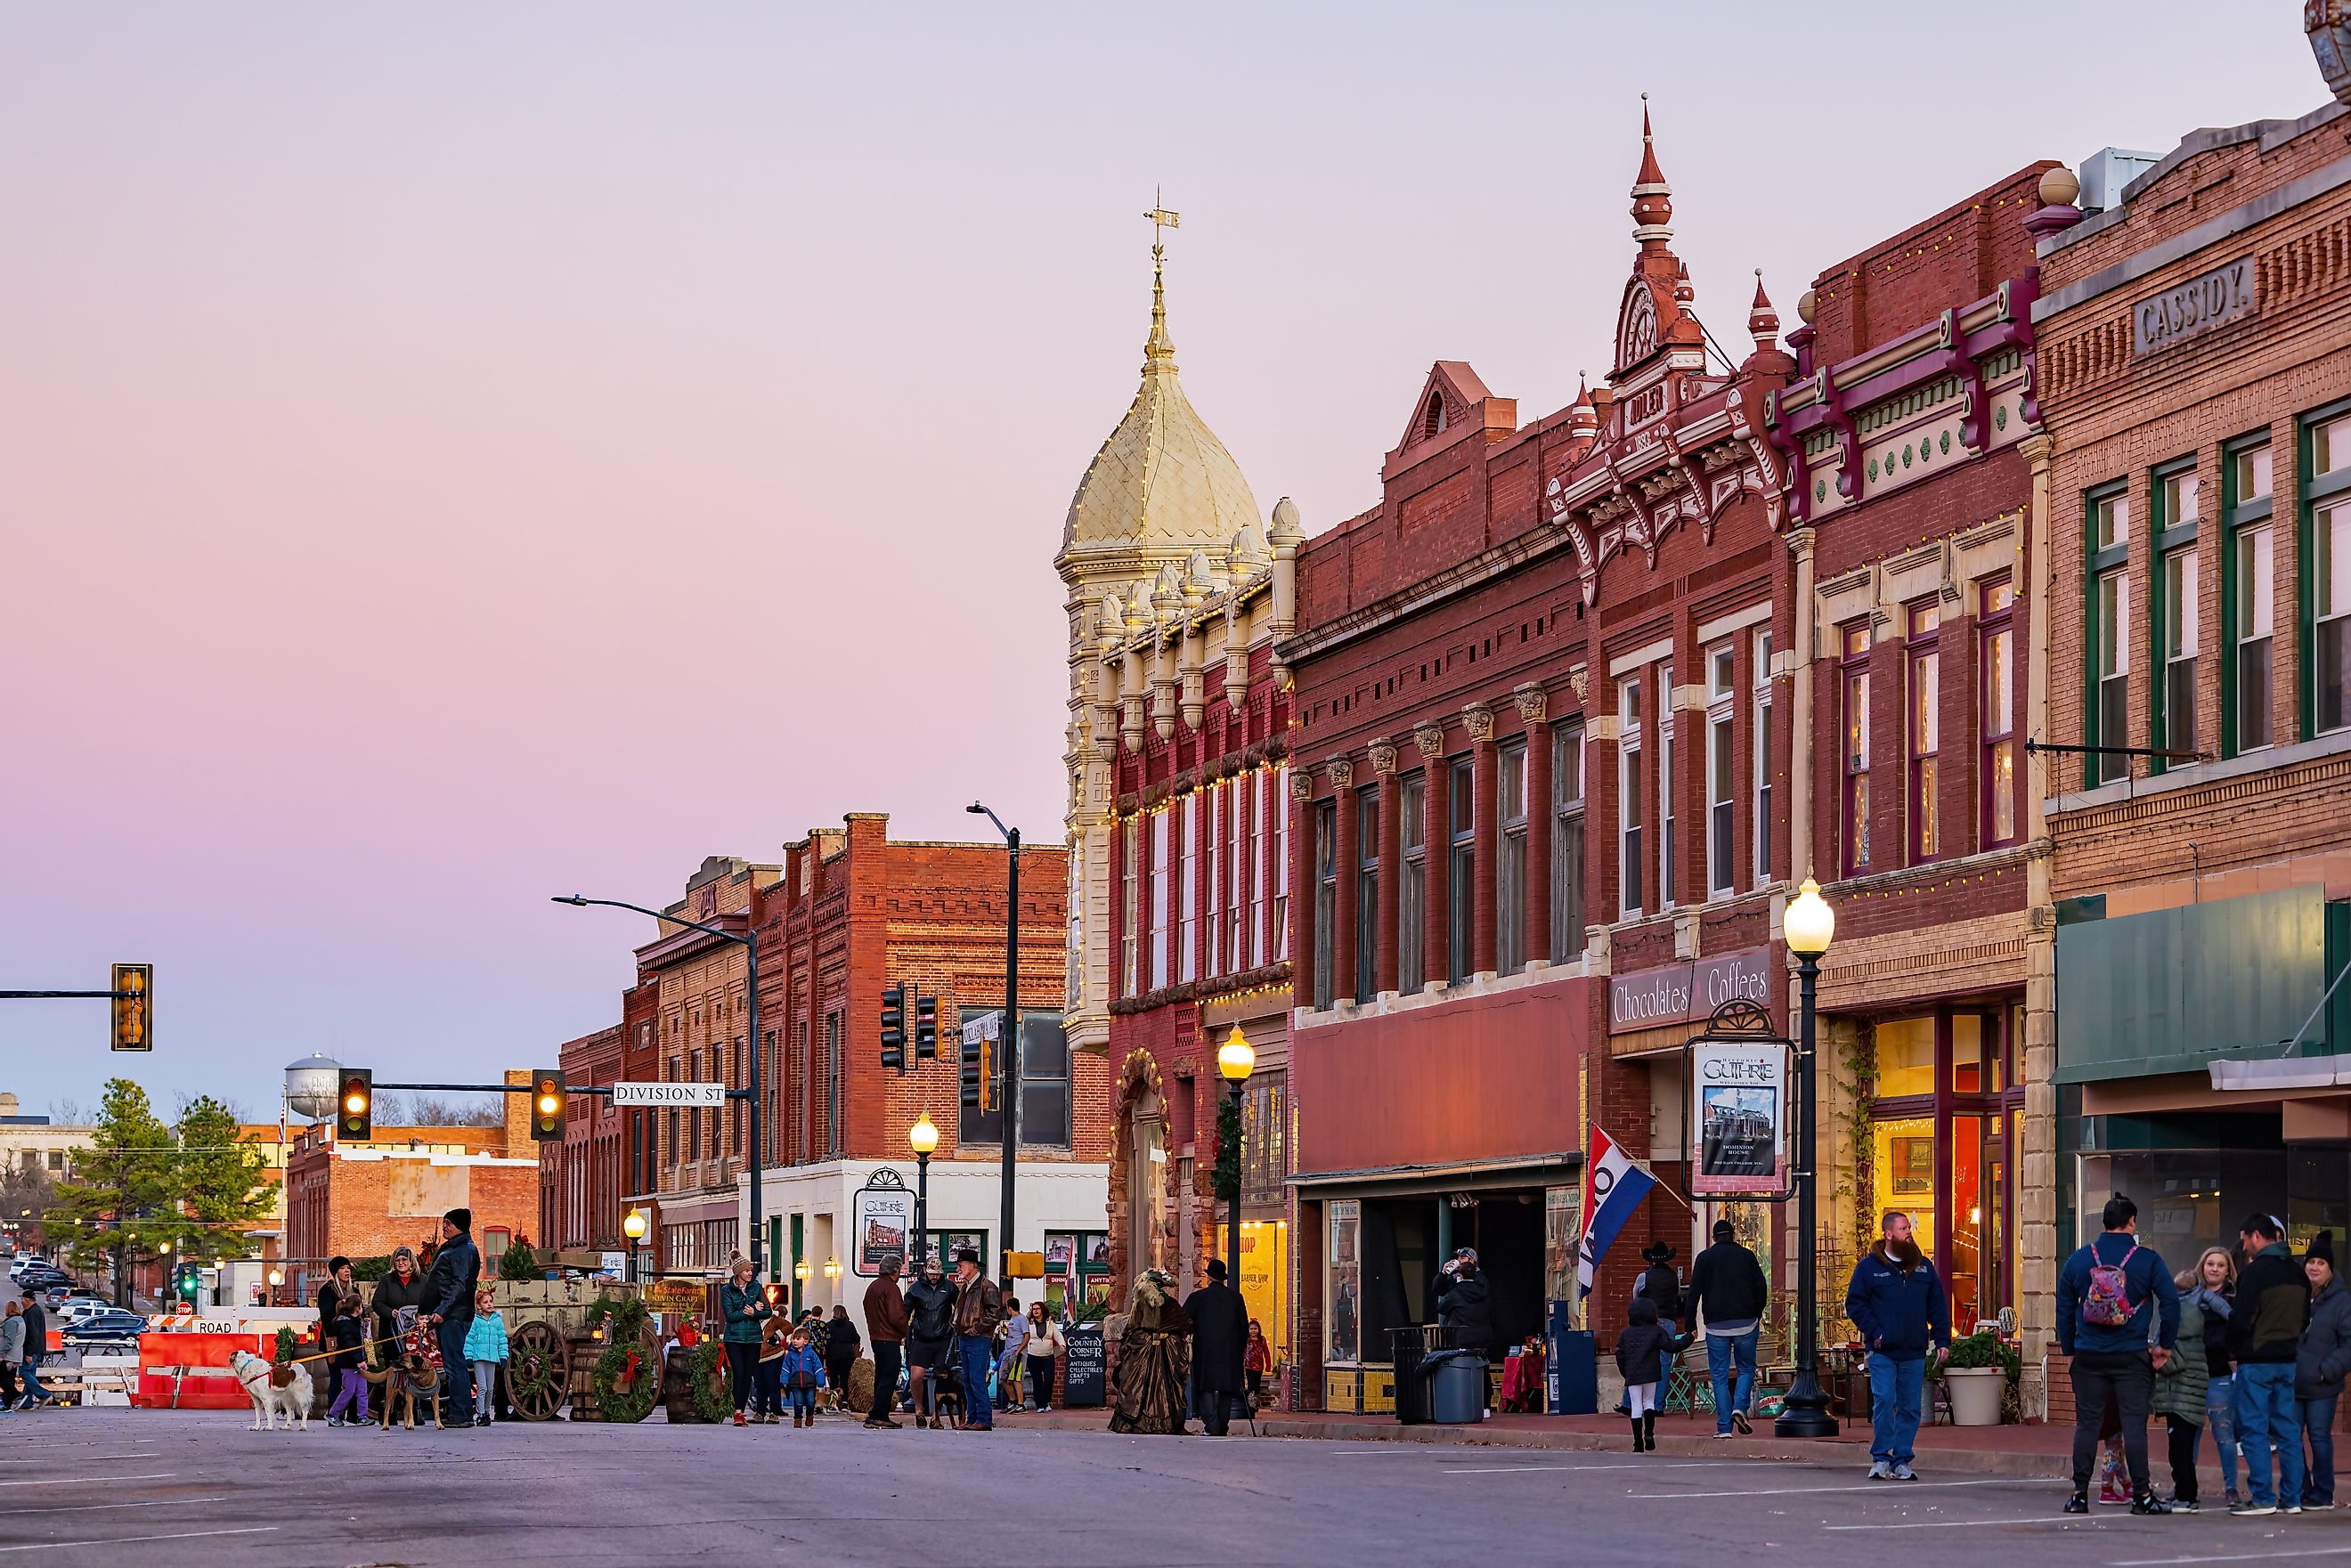 Night view of historical buildings in Guthrie, Oklahoma. Editorial credit: Kit Leong / Shutterstock.com